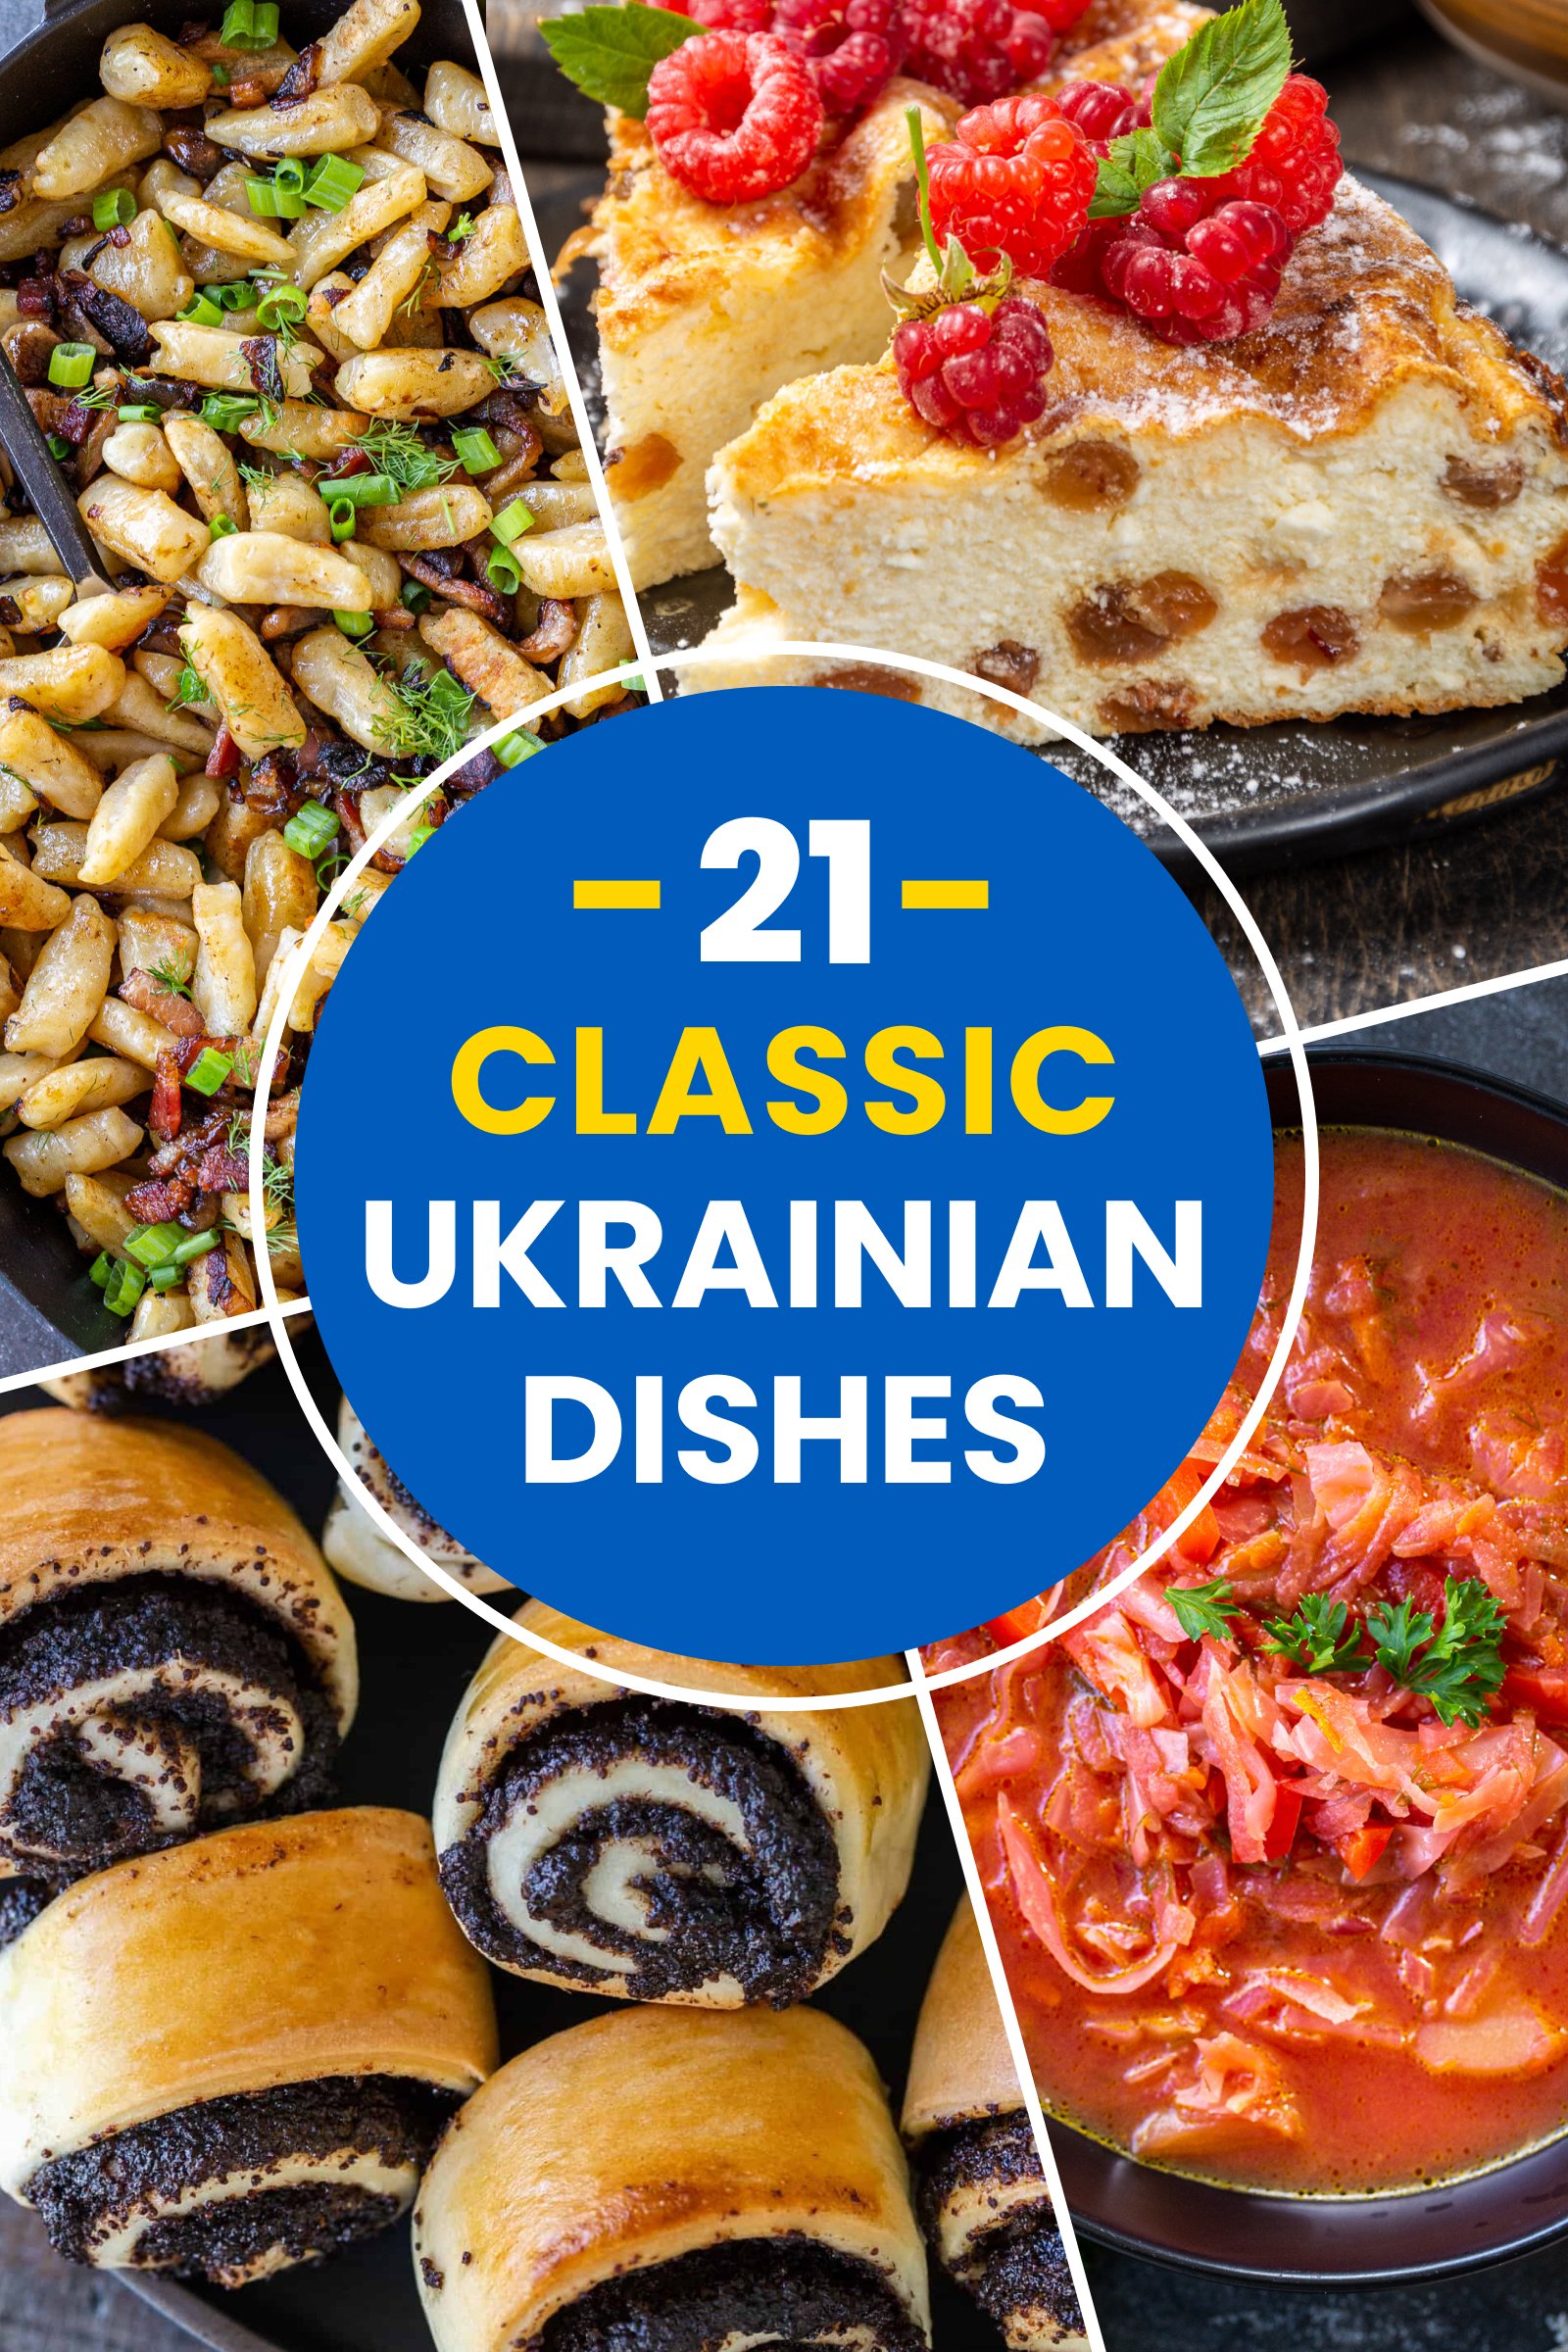 15 Traditional Russian Foods You Must Try